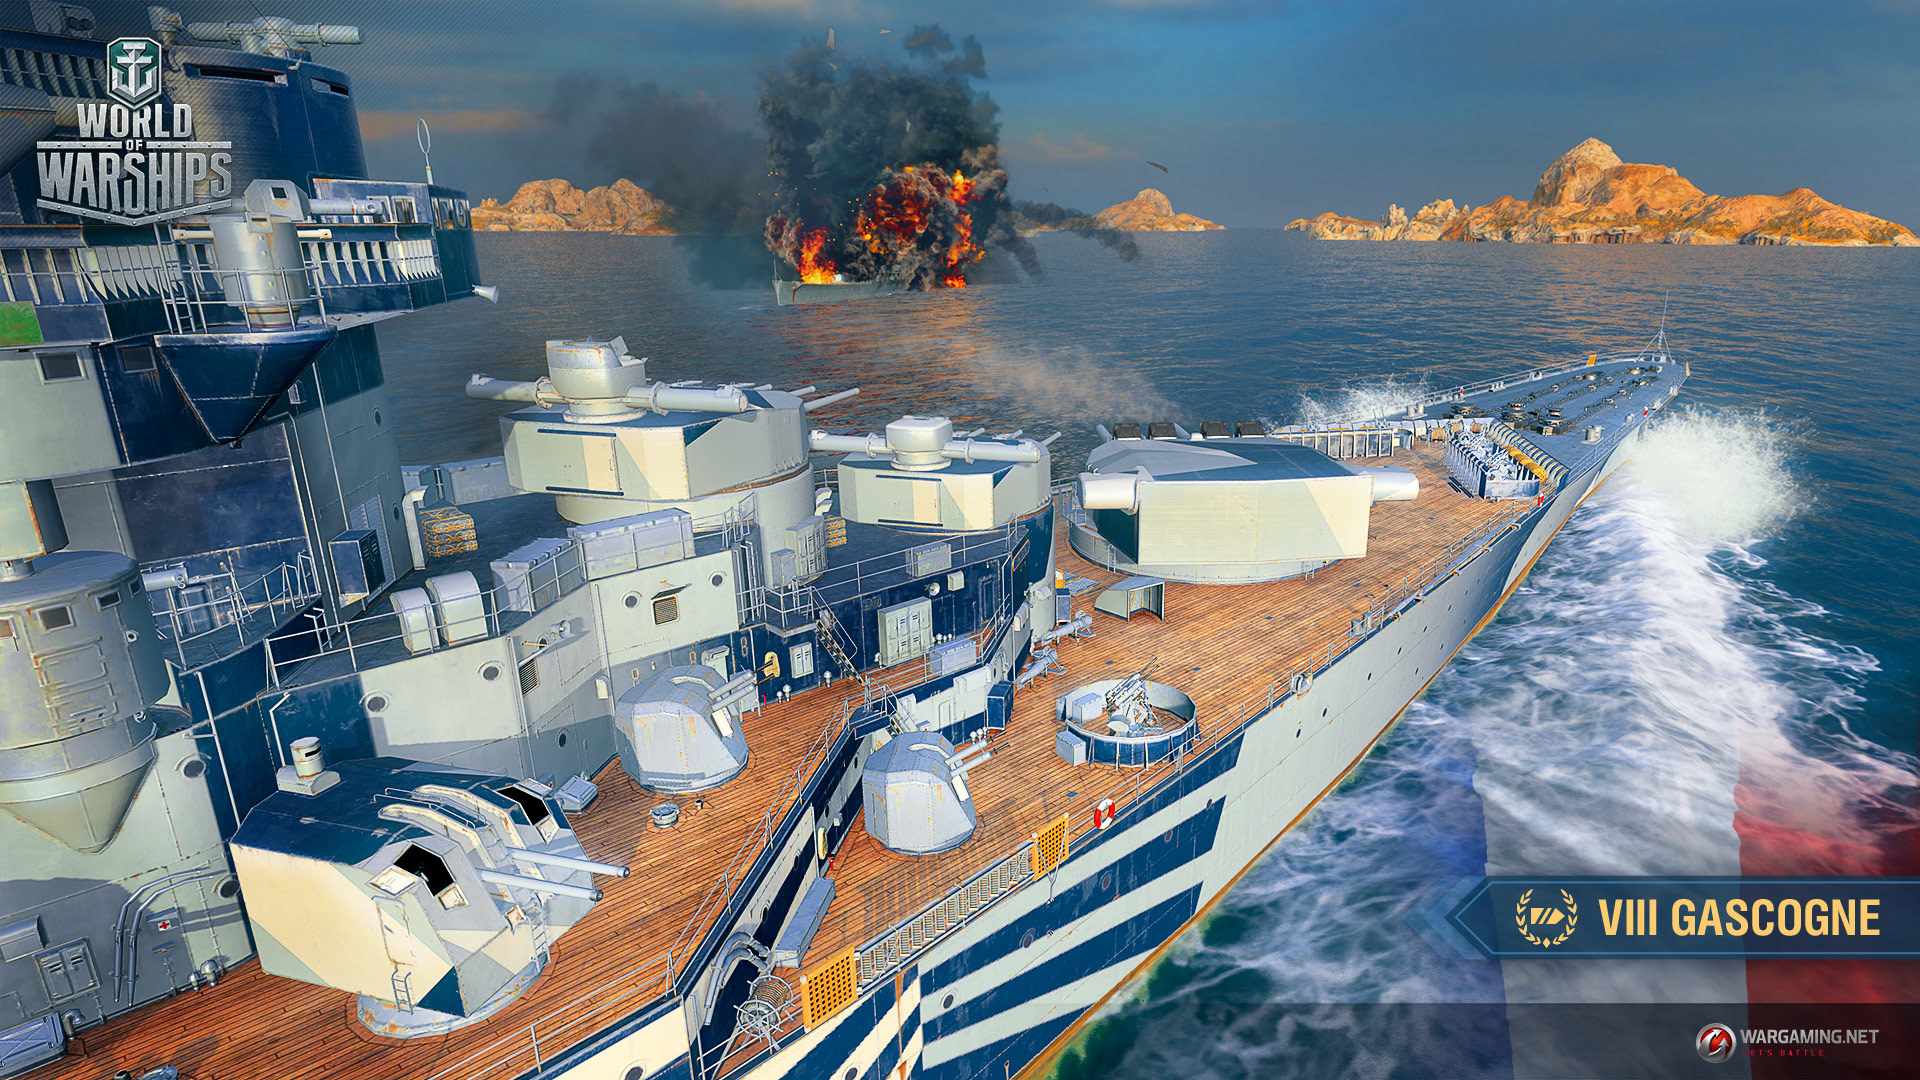 Aug 8 19 Ranked Battles Thirteenth Season World Of Warships Wows Admiral Join The Fight On Your Nines And Win Valuable Prizes Credits Camouflage Patterns Signals And Doubloons As Well As Over 5 000 Steel Which Can Be Exchanged For Unique